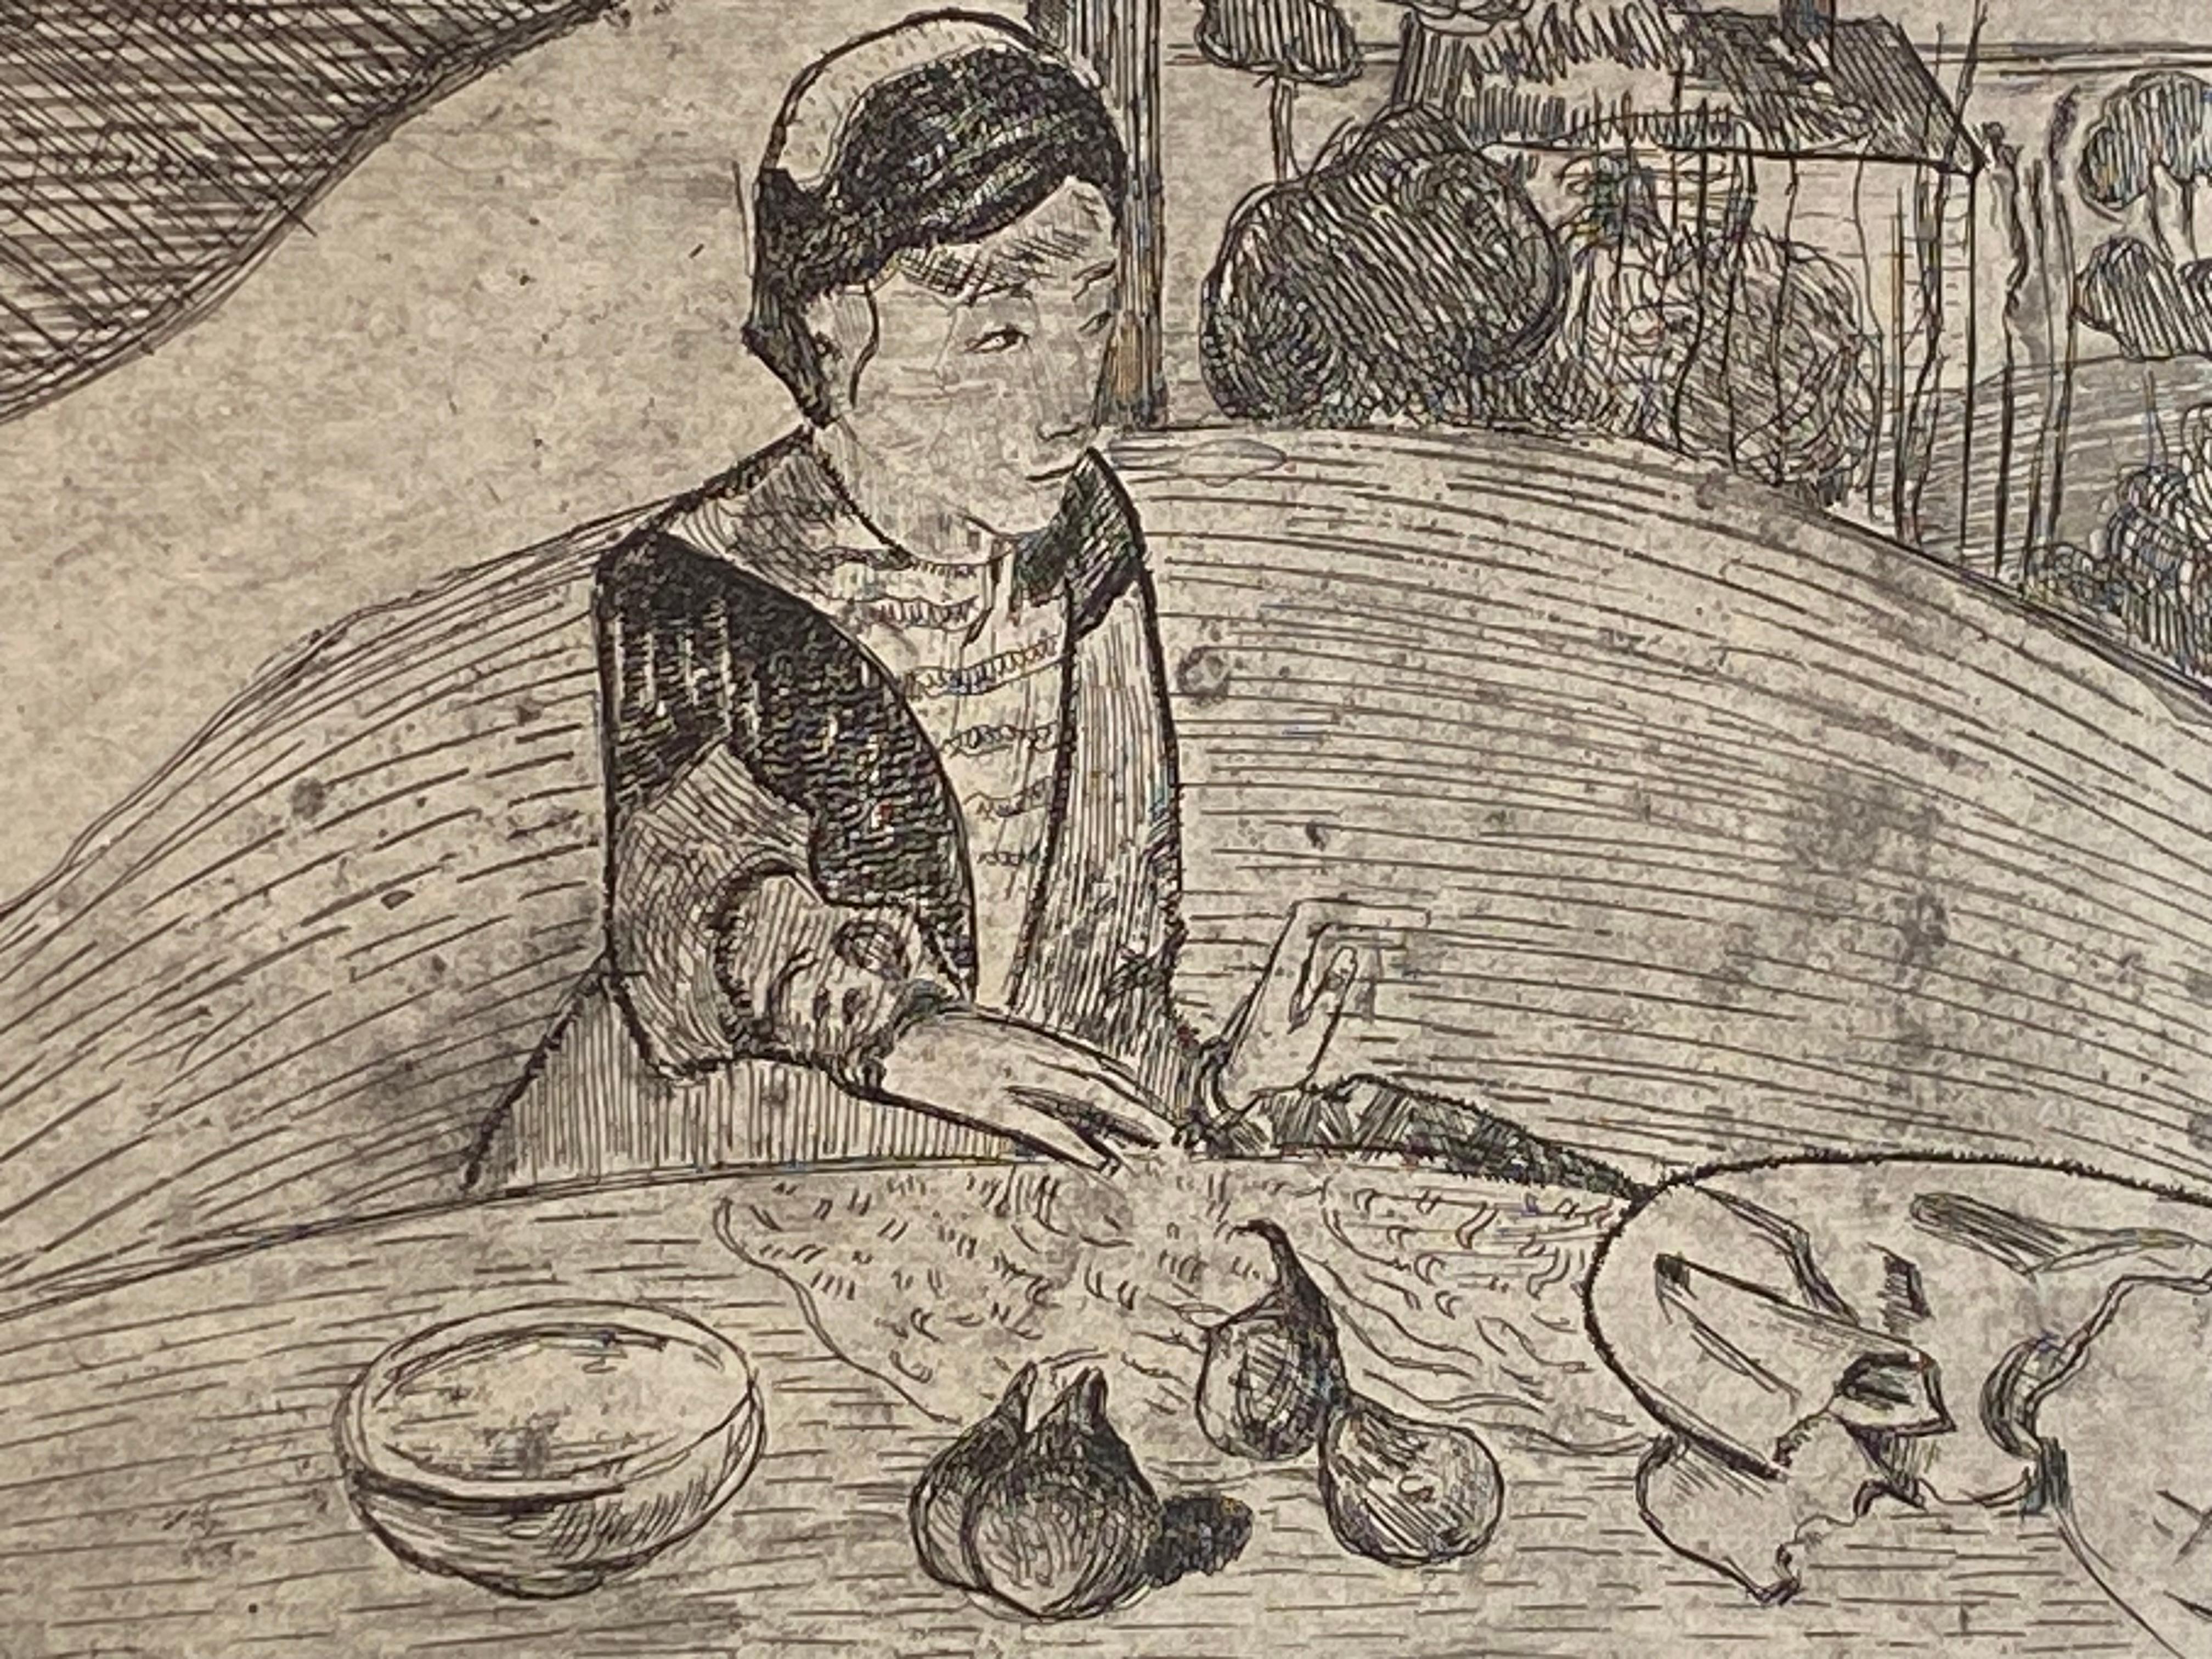 Original etching and lavis in black ink on Arches watermarked crème laid paper by Paul Gauguin. Titled: “La Femme aux Figues” (The Woman with Figs). This impression is from the 3rd state of three states (Kornfeld, 25 i/iii), after Madame Delatre,